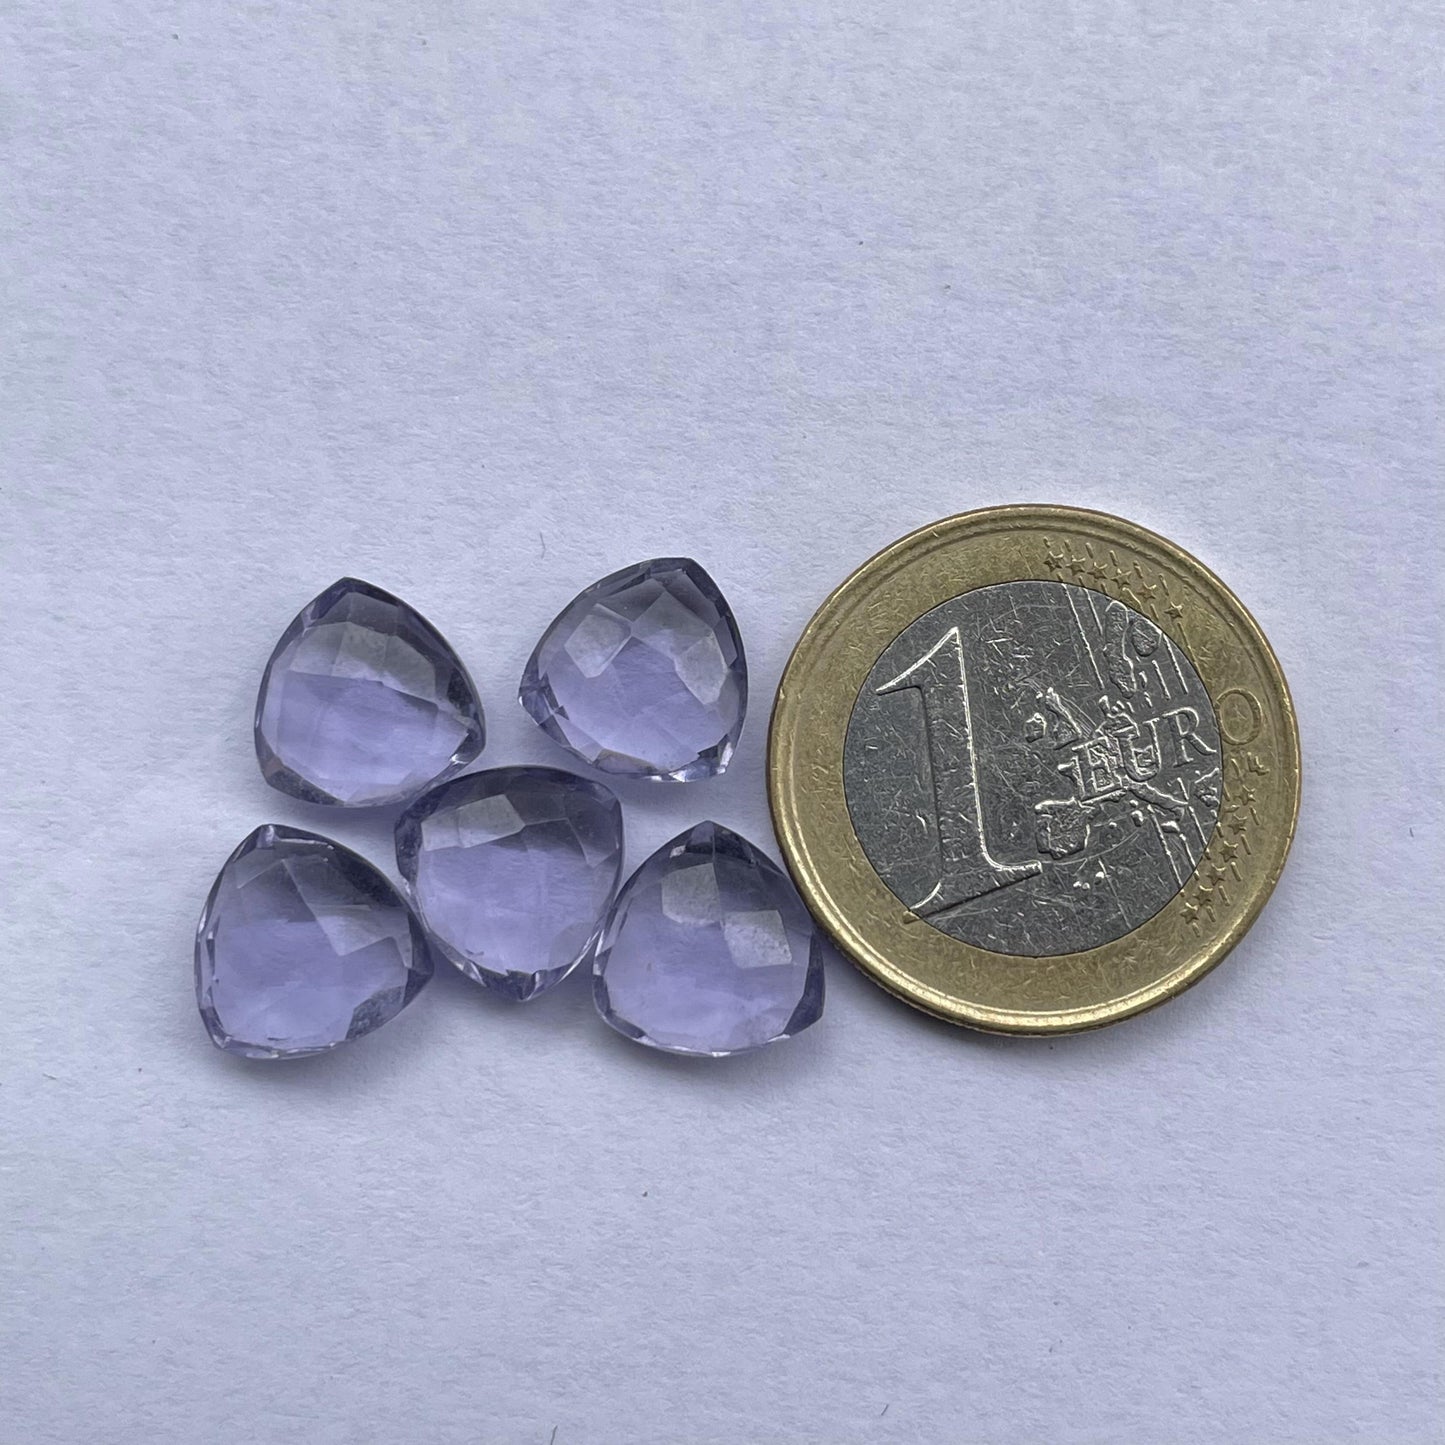 Amethyst Faceted Nice Quality (10 mm) Briolette (Lab Created)